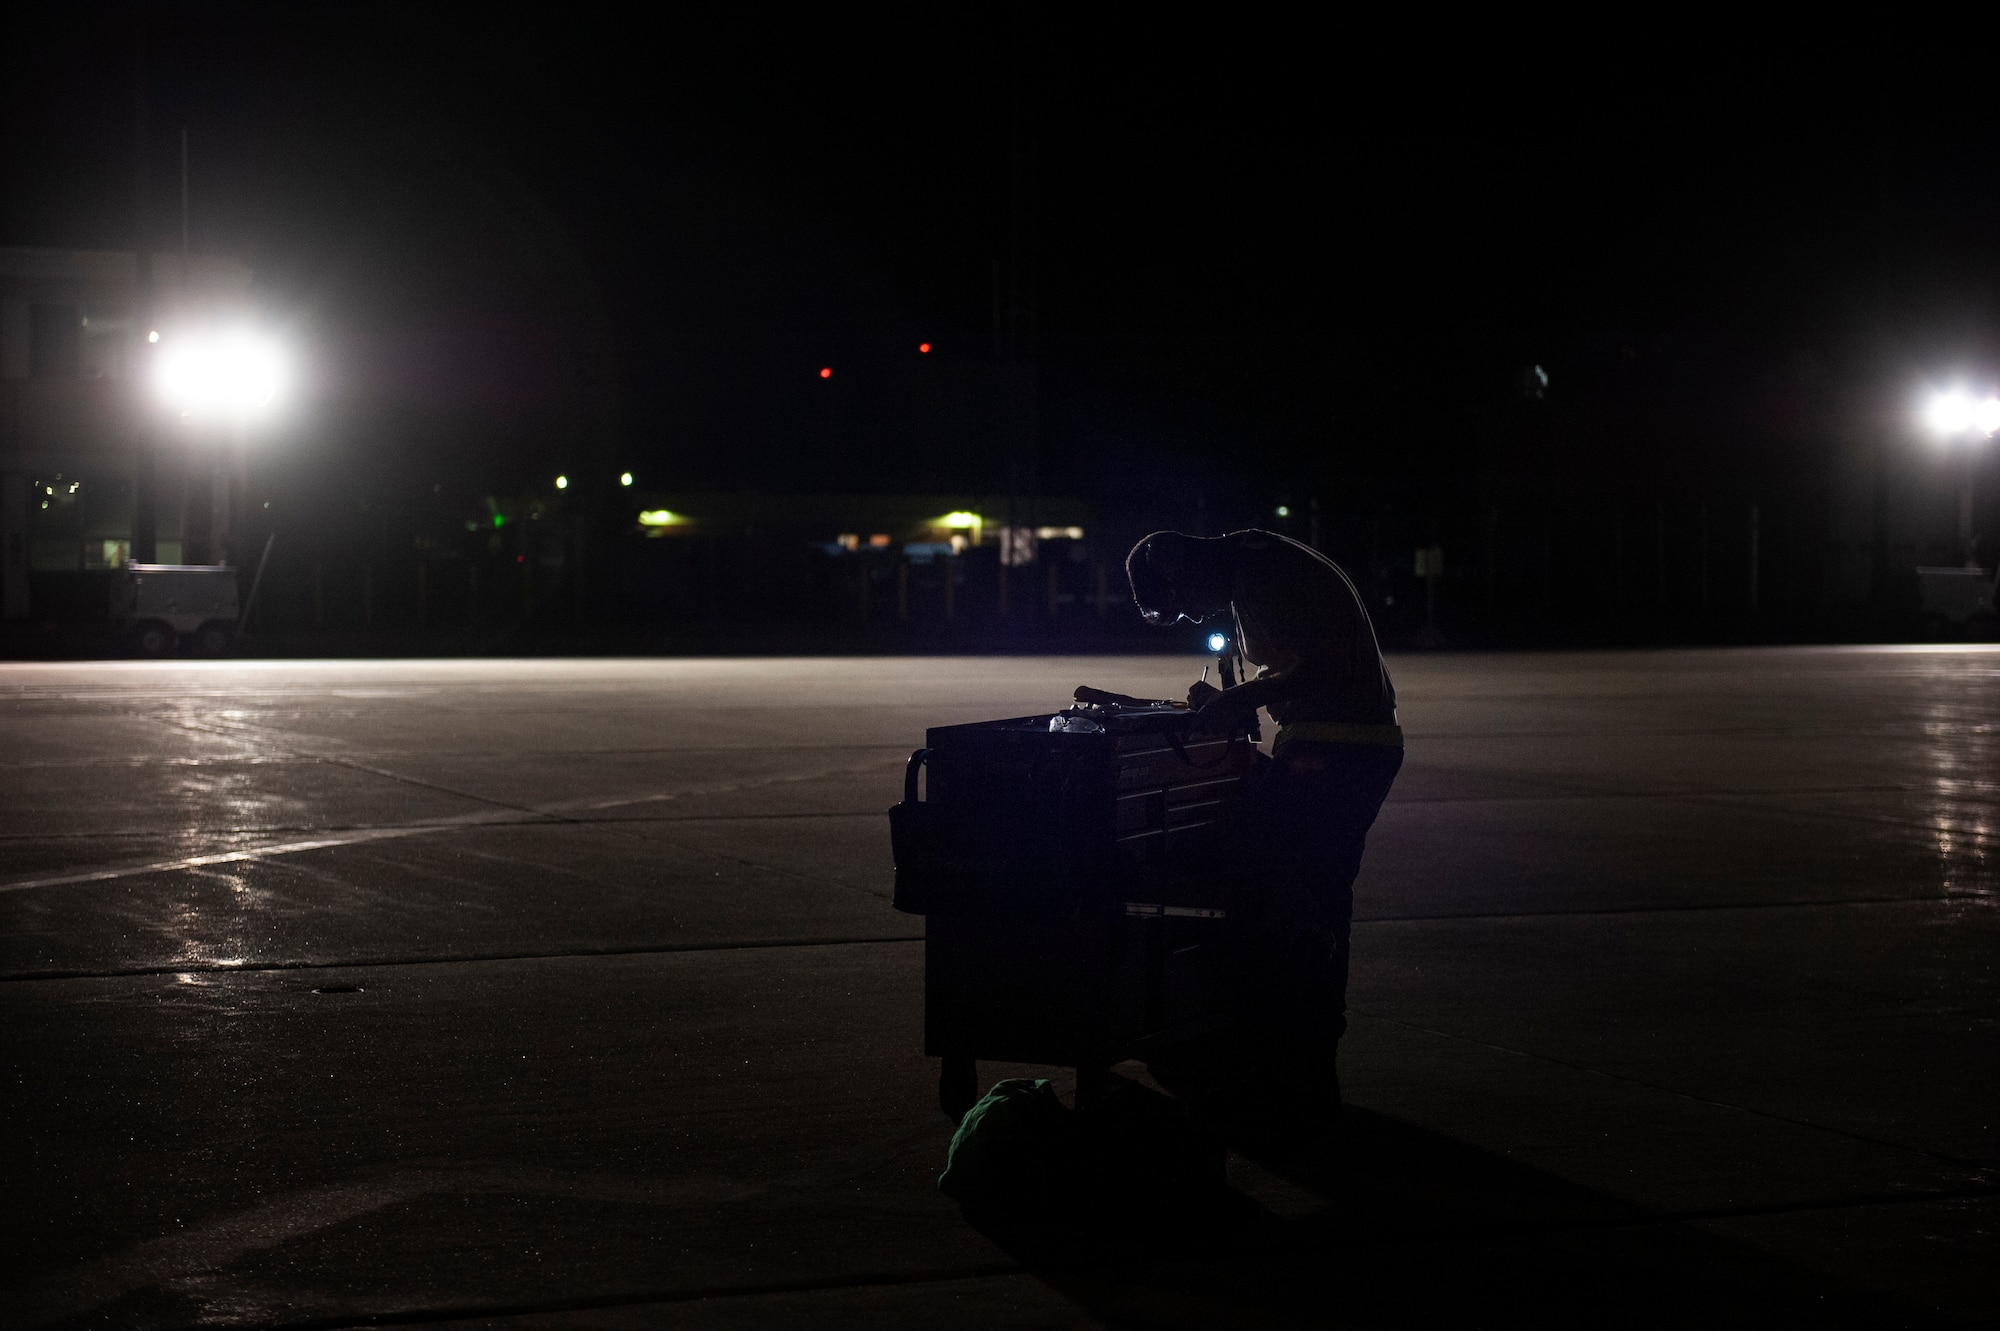 A U.S. Air Force Airman, assigned to the Ohio National Guard’s 180th Fighter Wing, reviews aircraft forms prior to an early morning launch, Oct. 12, 2020, as they depart from the 180FW in Swanton, Ohio, for an Aerospace Expeditionary Force deployment.